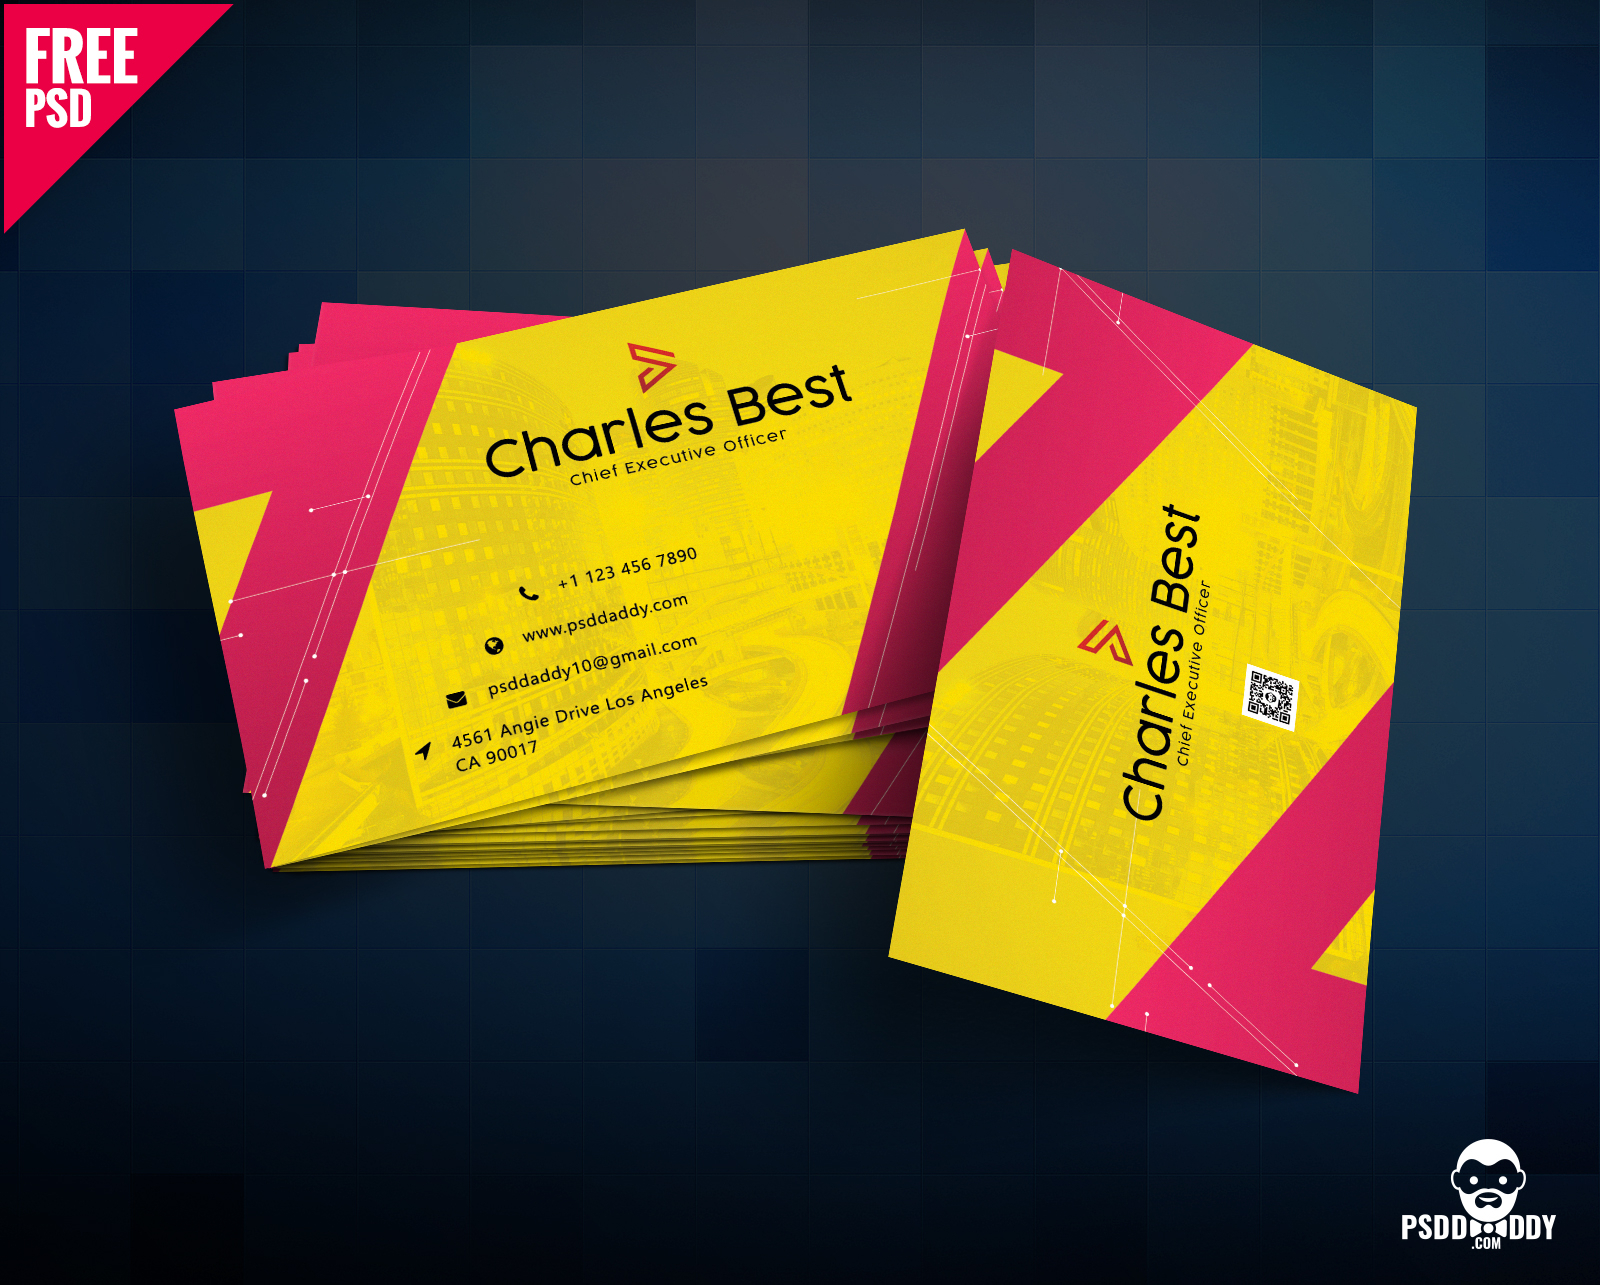 Download] Creative Business Card Free Psd | Psddaddy With Regard To Business Card Template Photoshop Cs6